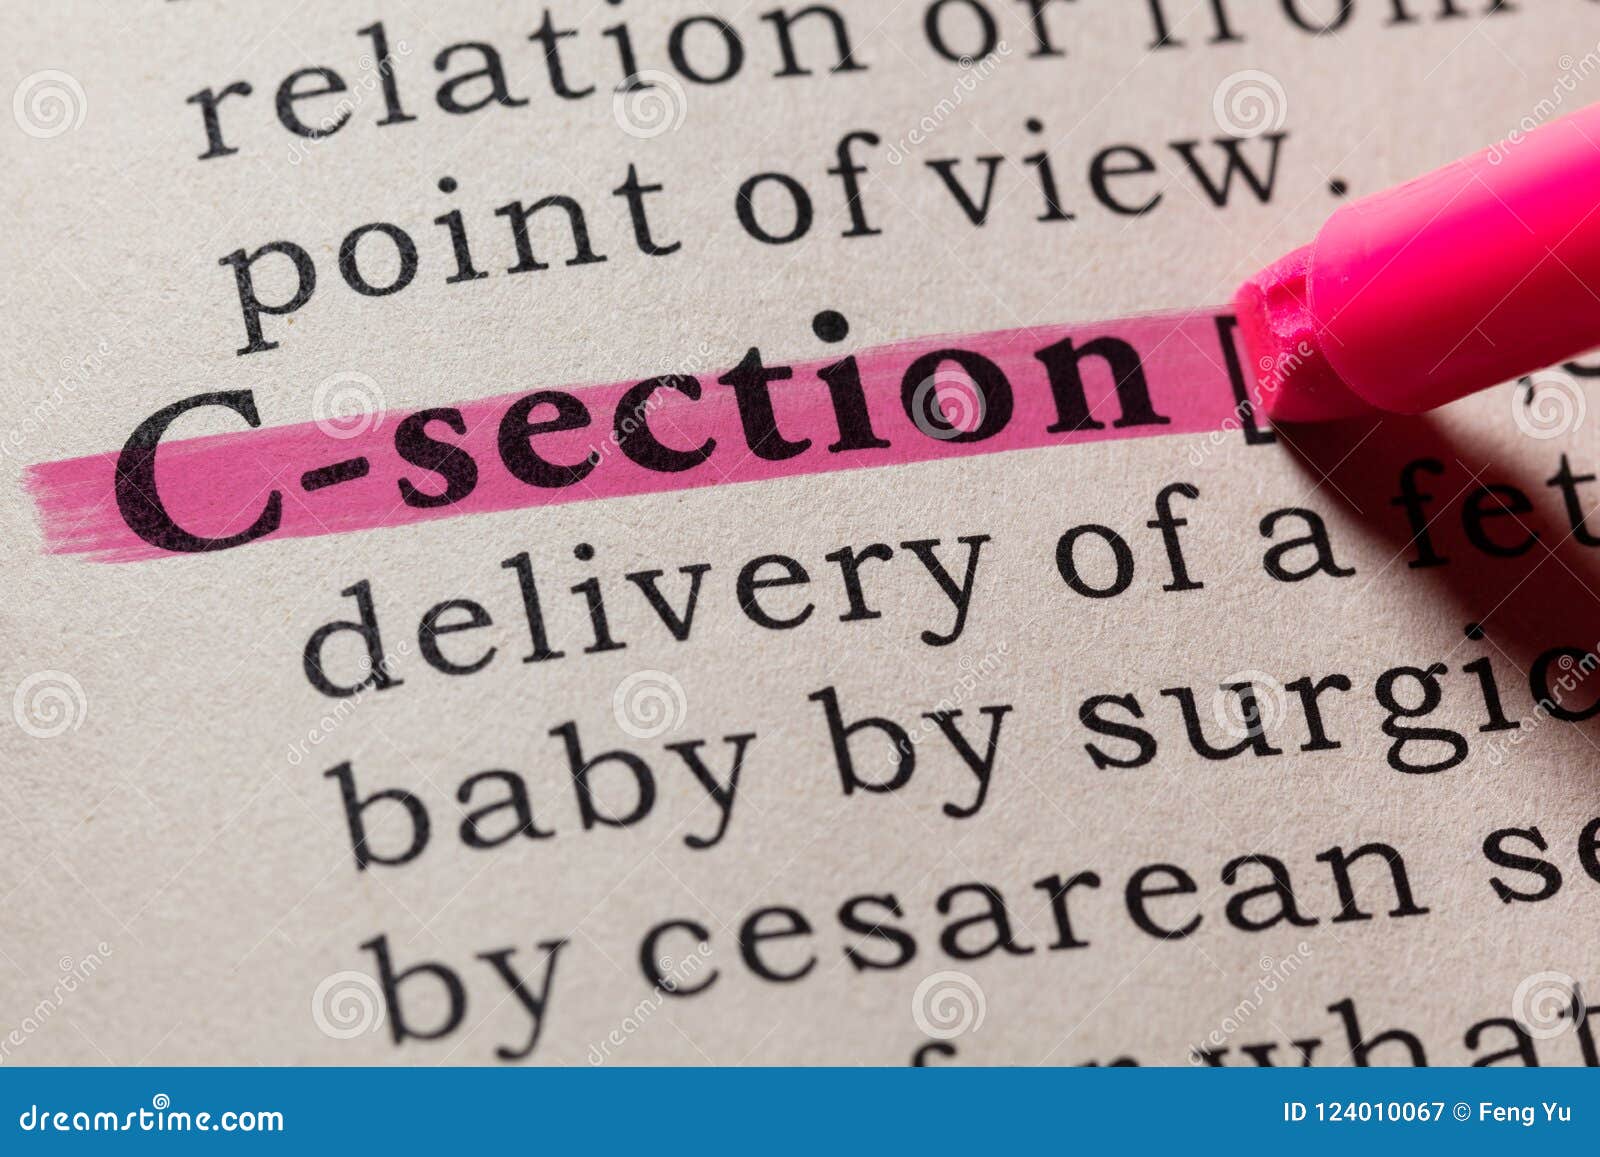 definition of c-section